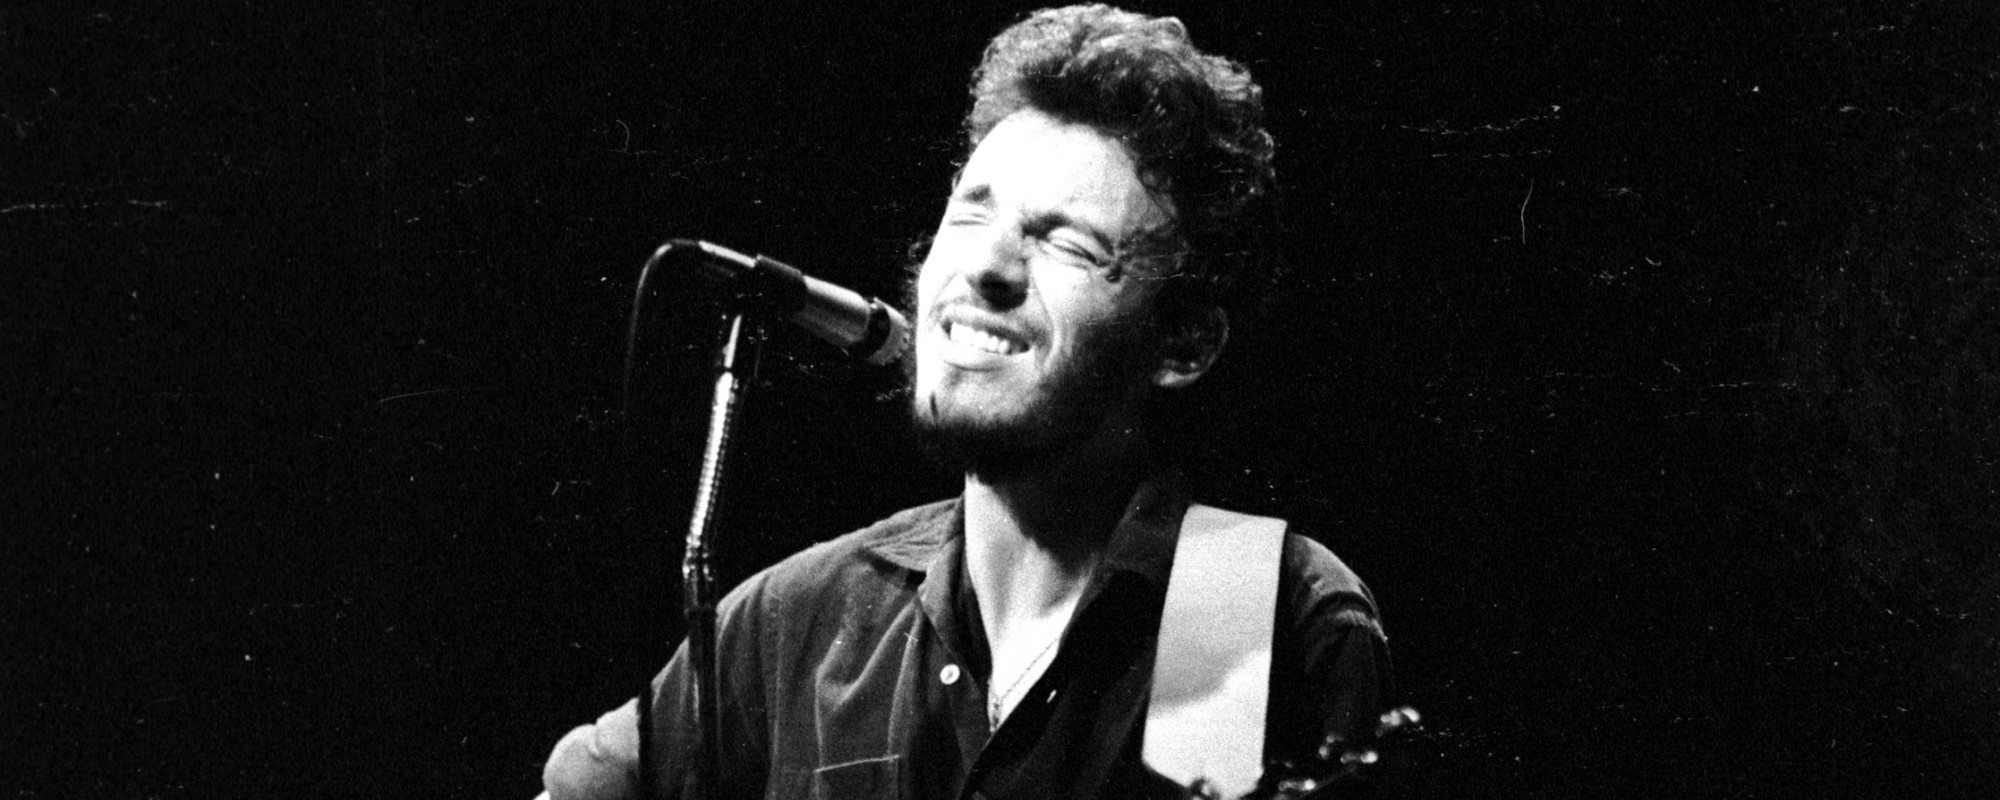 On This Day in 1972, Bruce Springsteen Auditions for Legendary Columbia Records Exec John Hammond